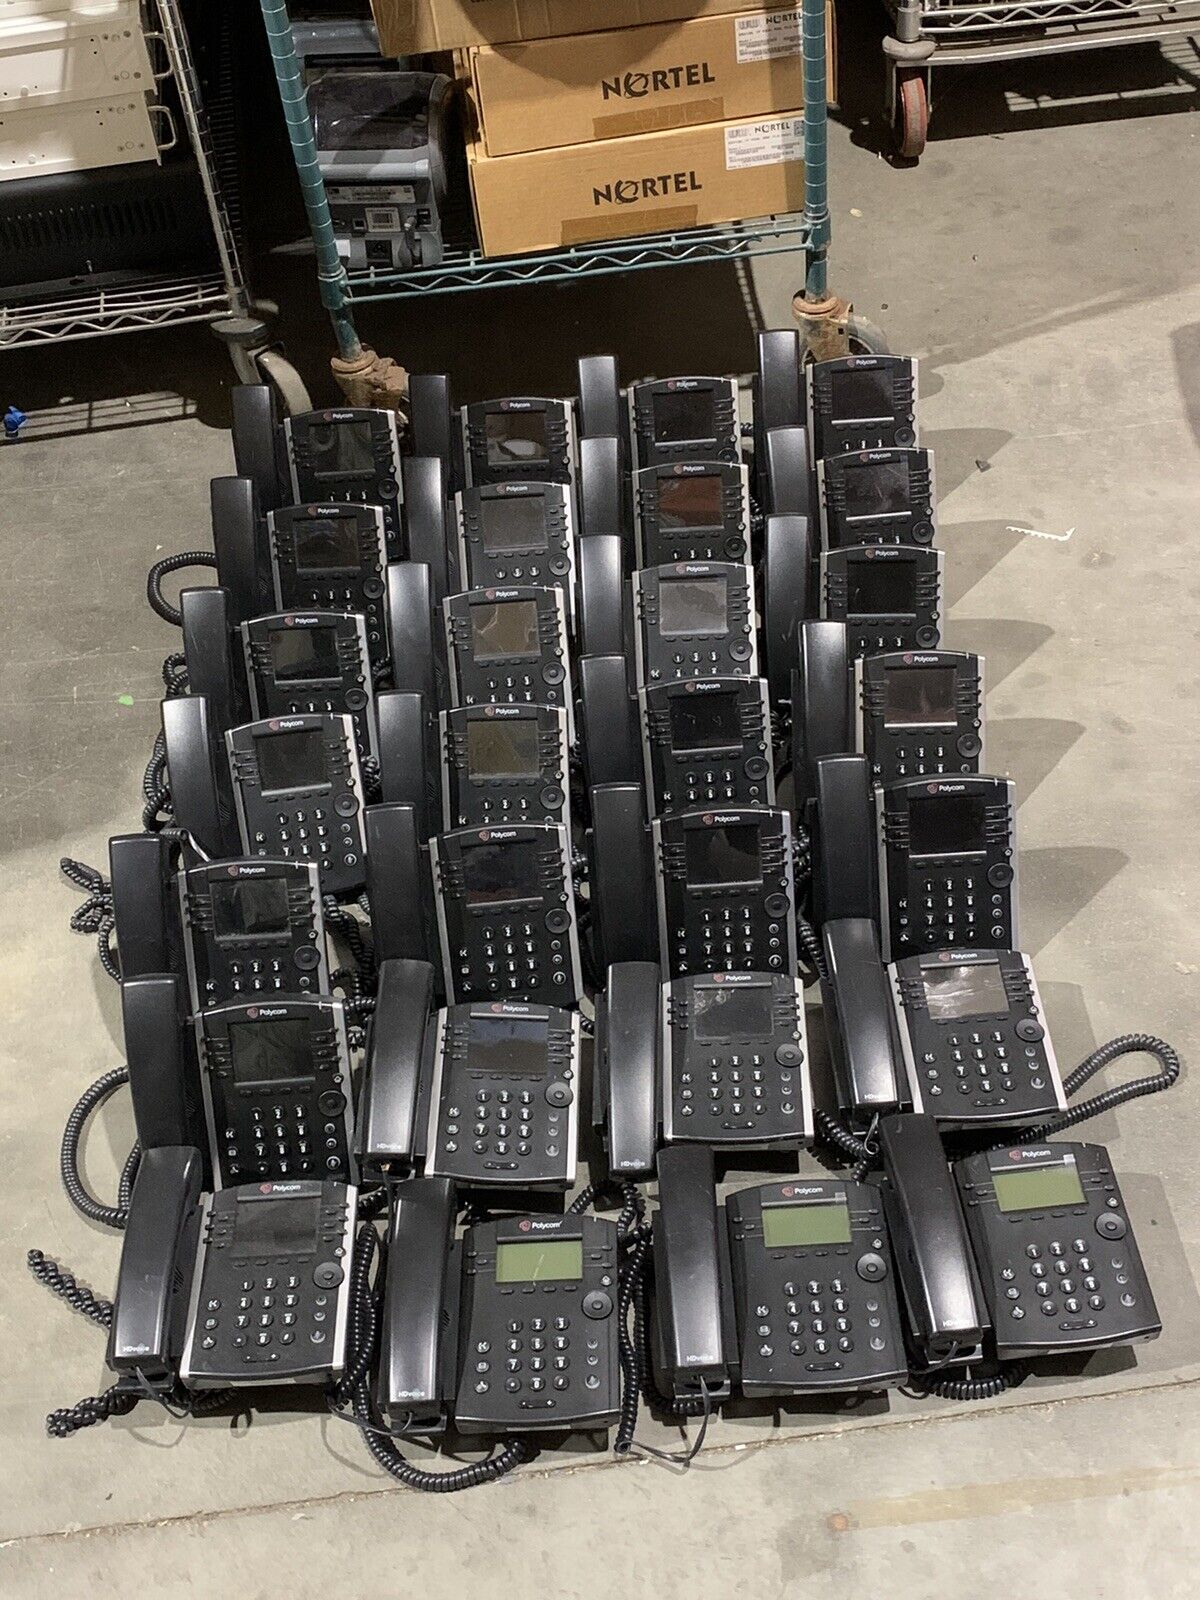 Lot of 28 Polycom VVX 411/311 VoIP Business Phones w/ Stands + Handsets Used